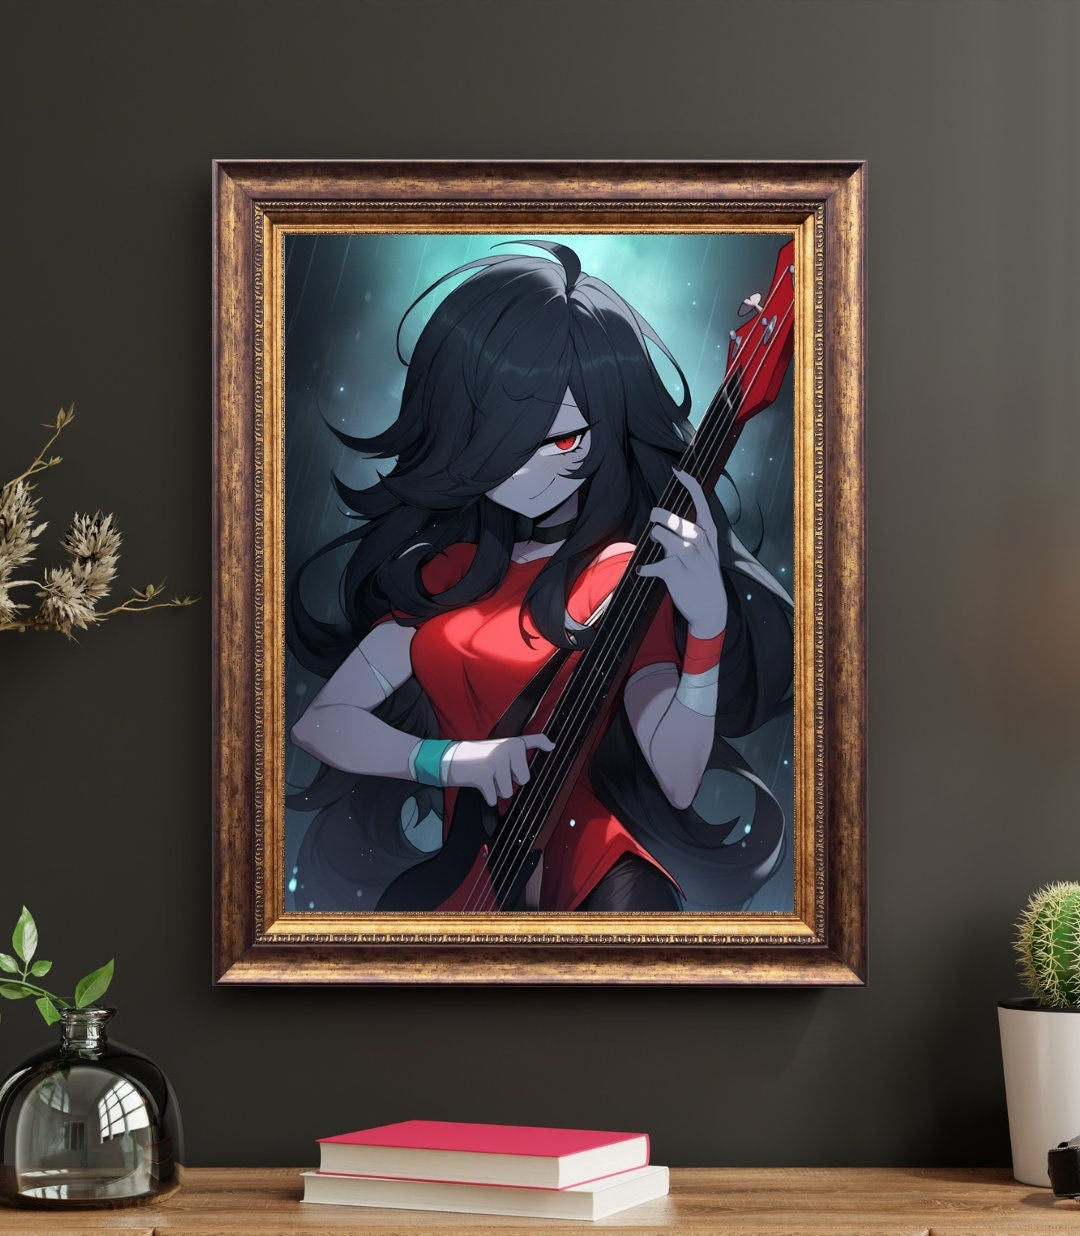 The Nocturne Songstress Art Print Wall Decor